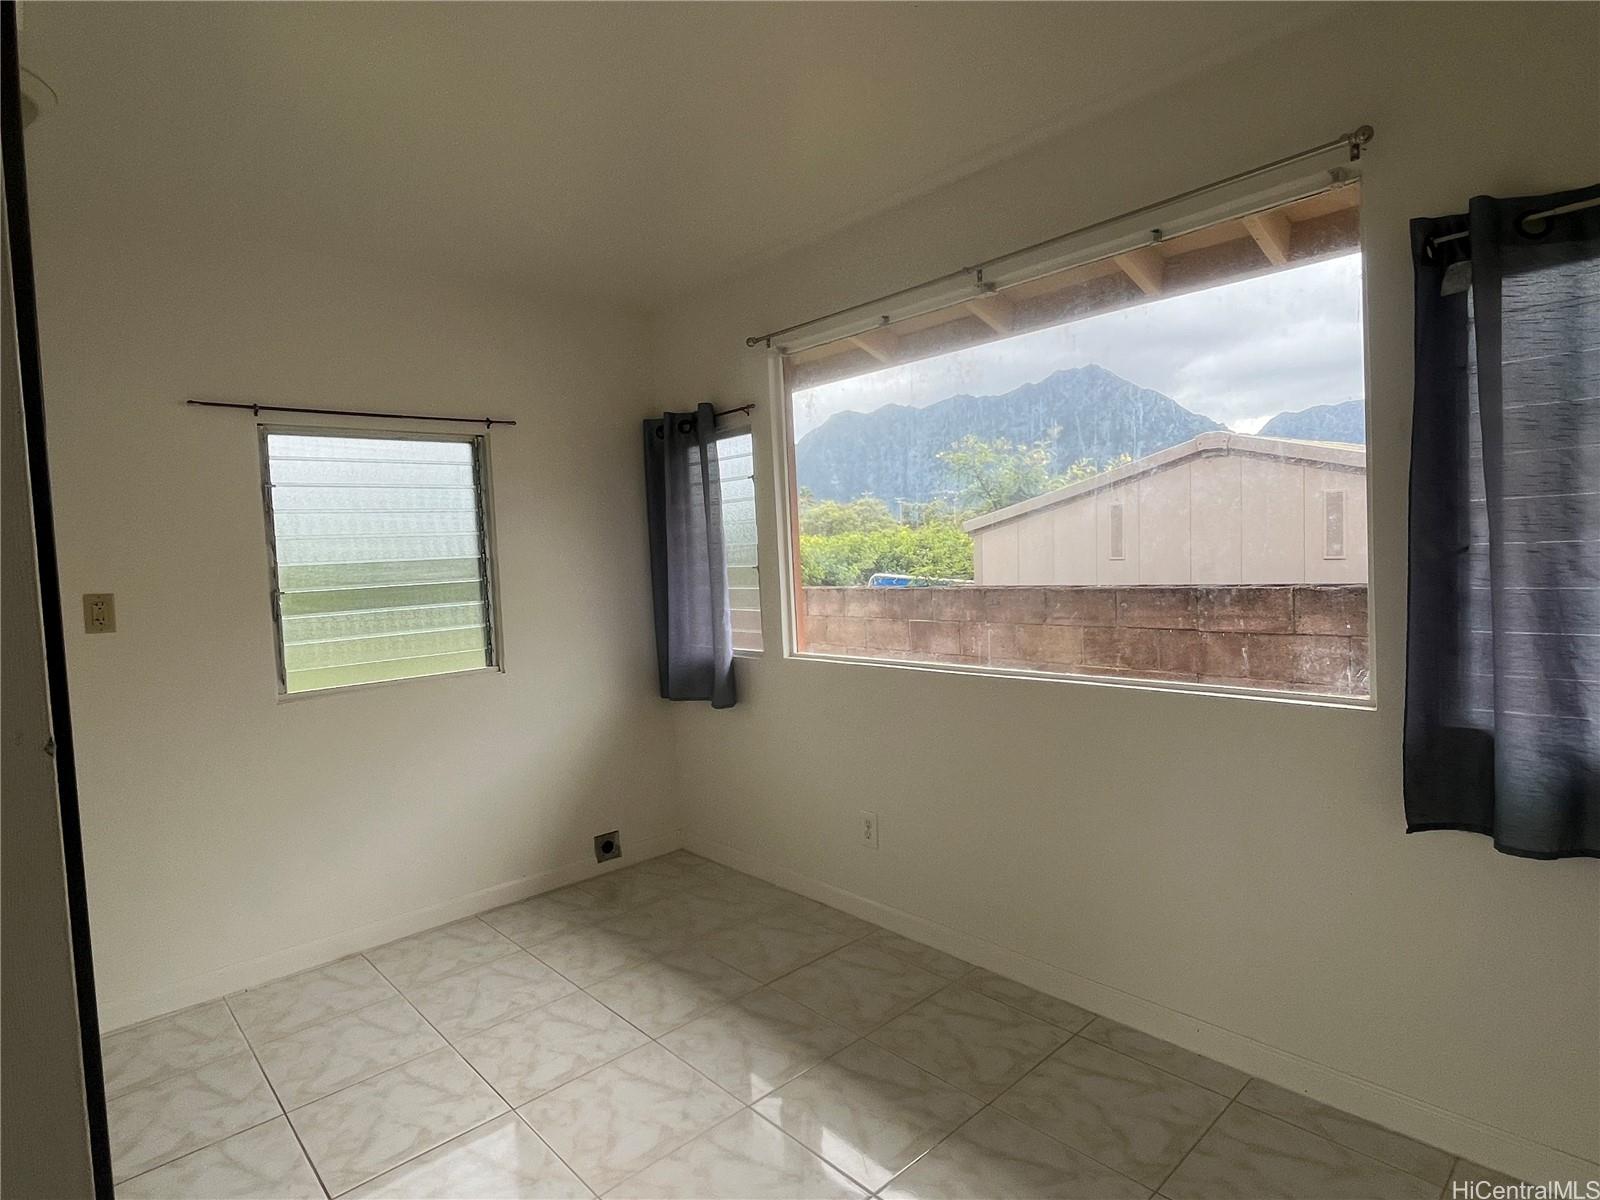 45-12 Oopuhue Place Kaneohe - Rental - photo 11 of 15